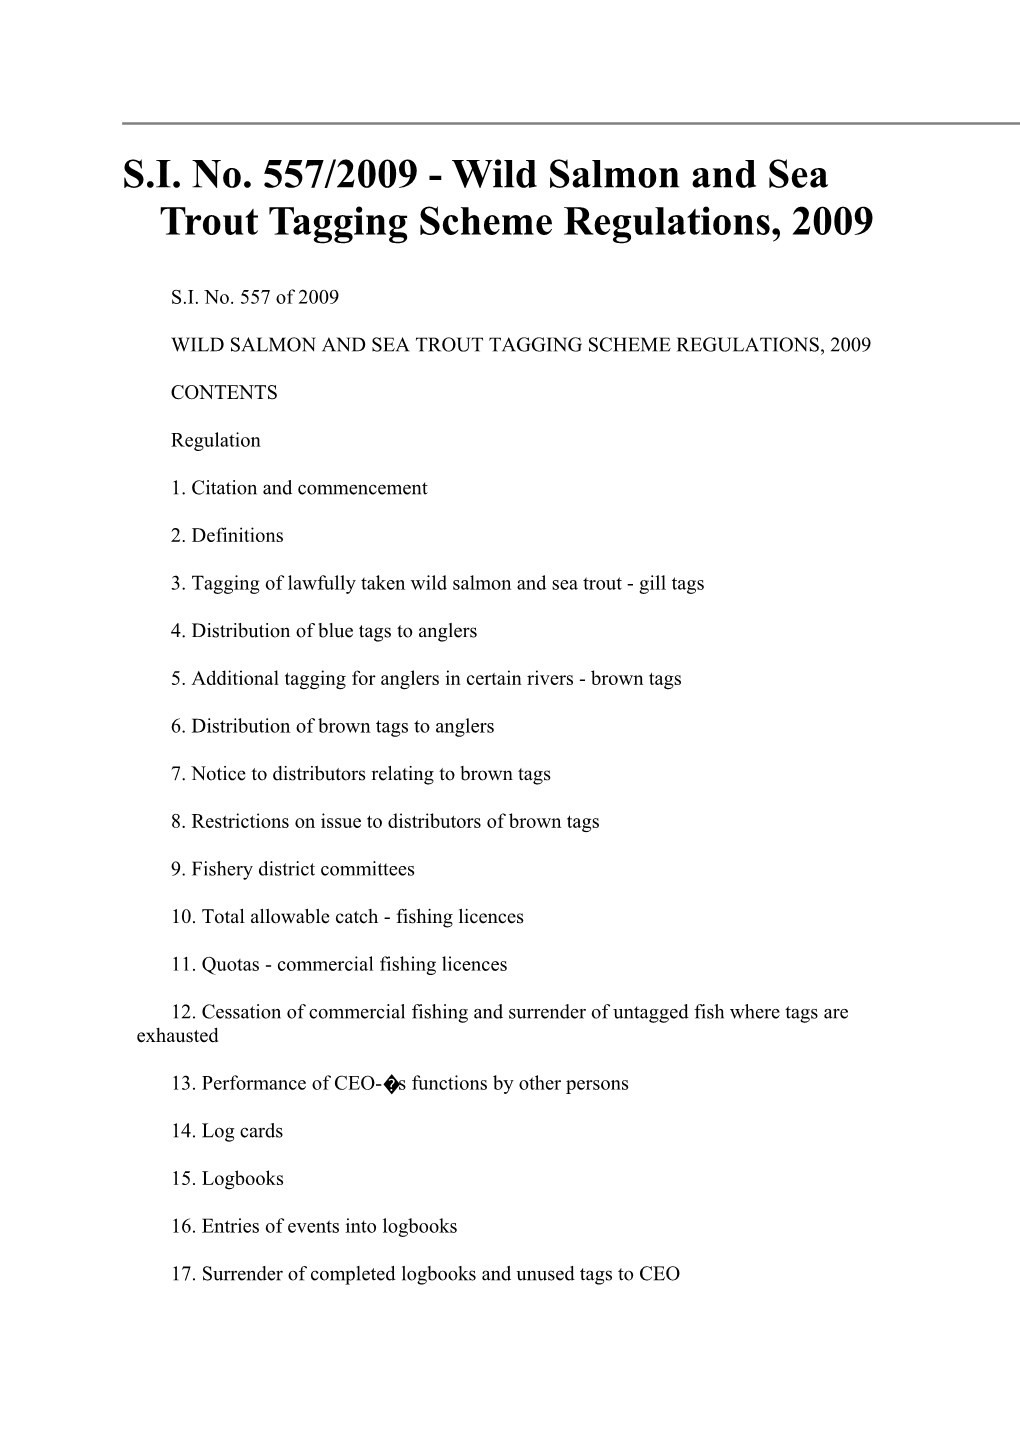 S.I. No. 557/2009 - Wild Salmon and Sea Trout Tagging Scheme Regulations, 2009